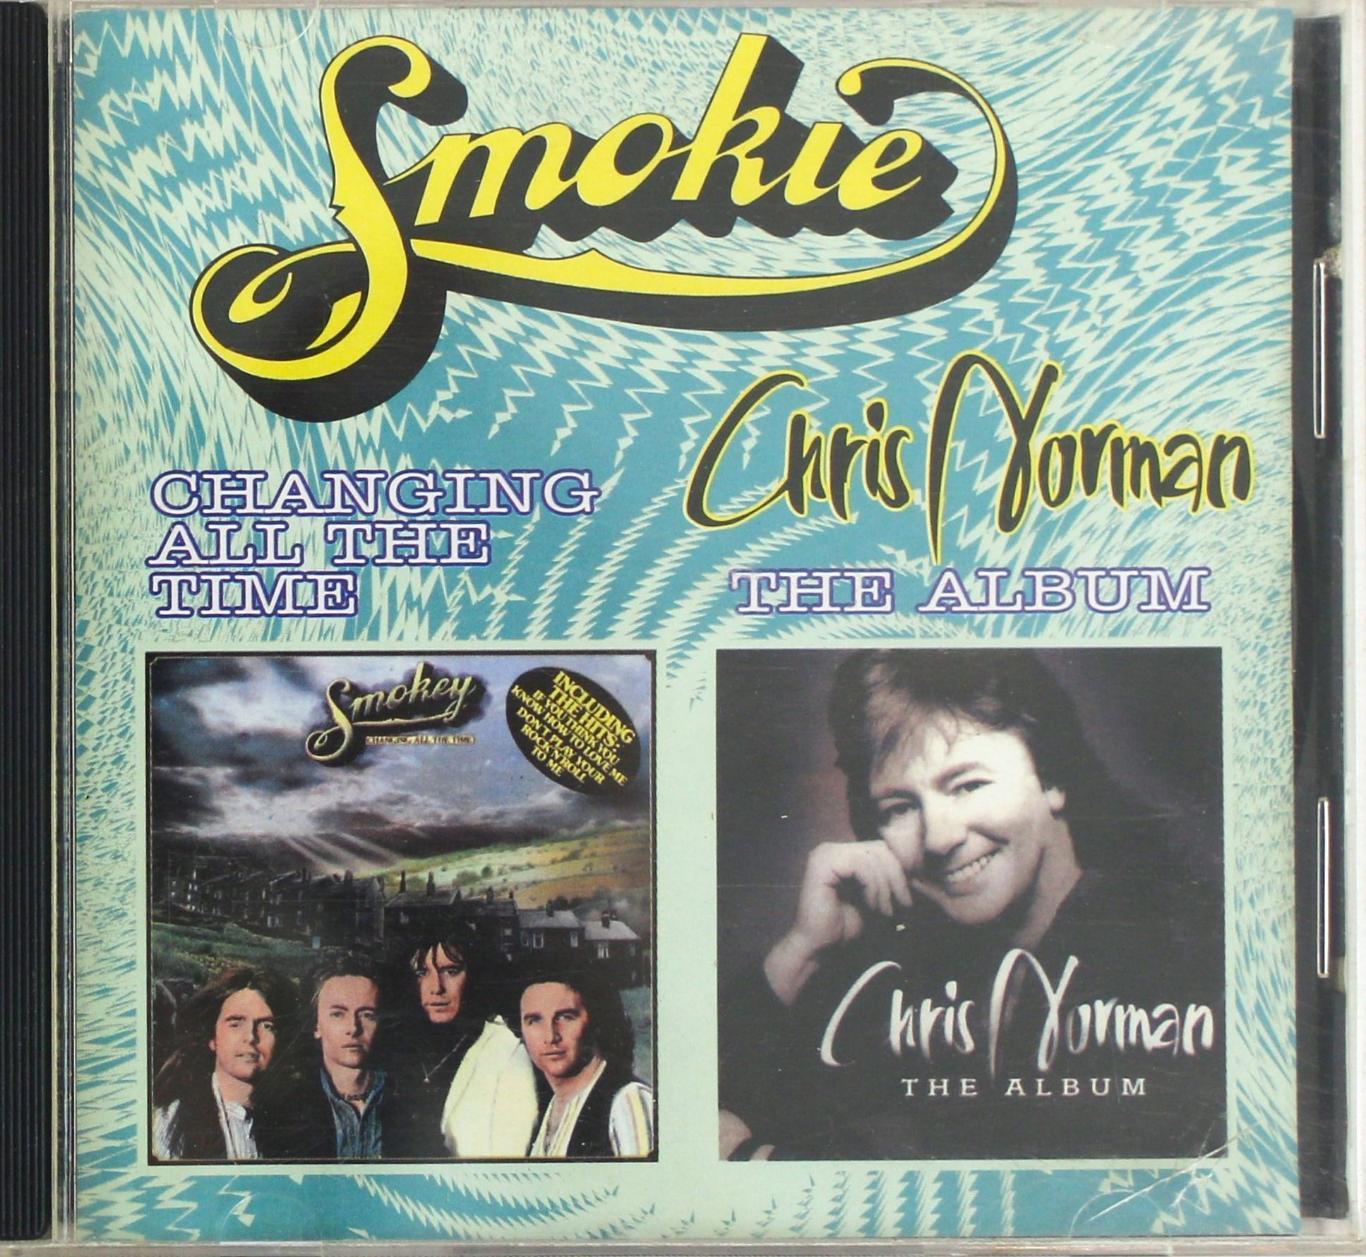 Музыка CD SMOKIE - Changing All the Time 1975 / Chris Norman - The Album 1994